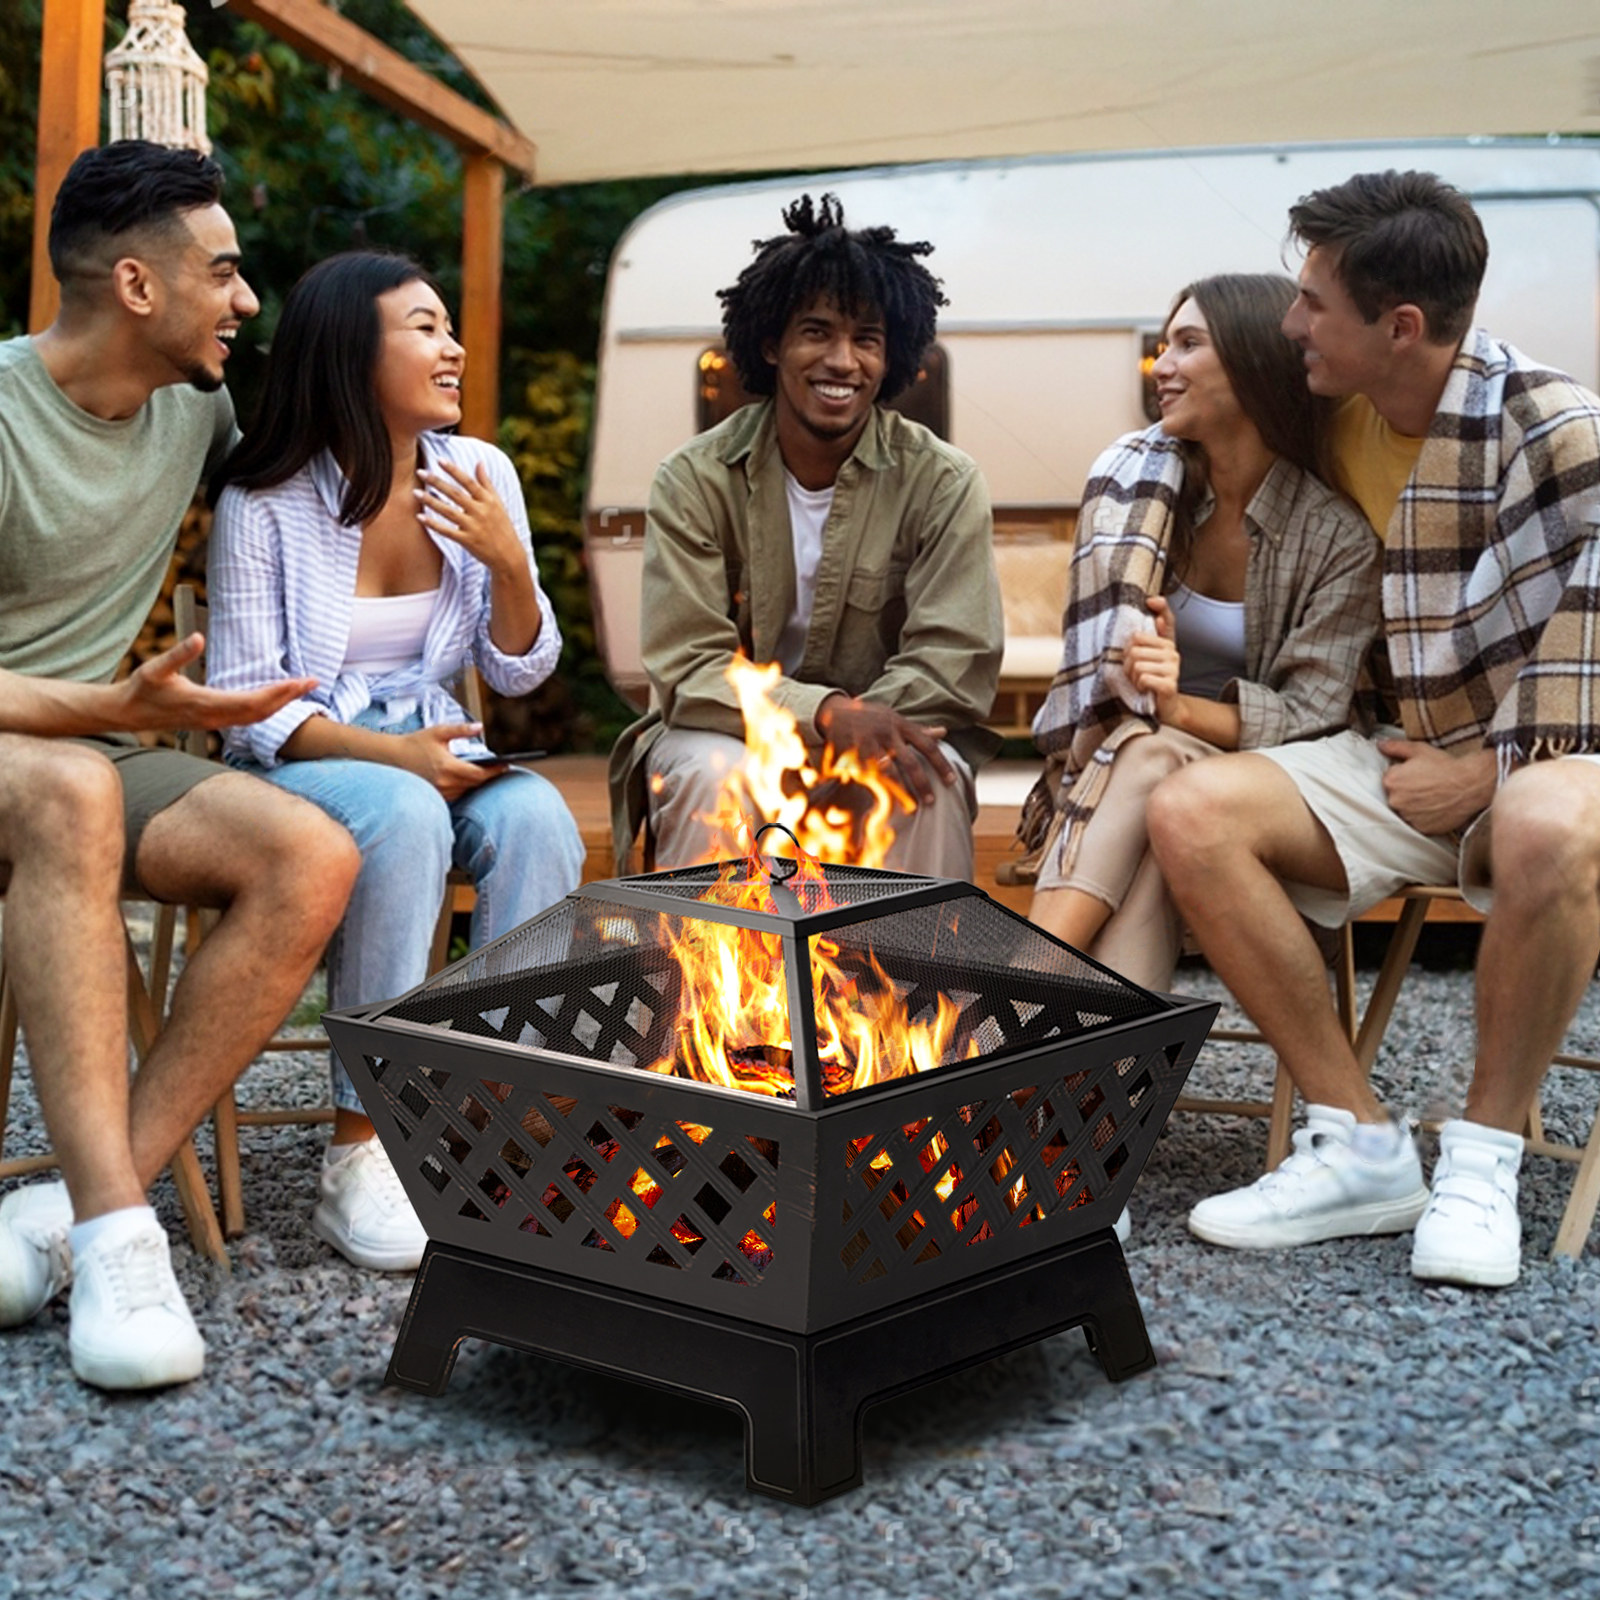 Kingso-26--Inch-Fire-Pits-Large-Wood-Burning-Square-Firepit-with-Ash-Plate-Spark-Screen-Log-Grate-Po-1920540-11